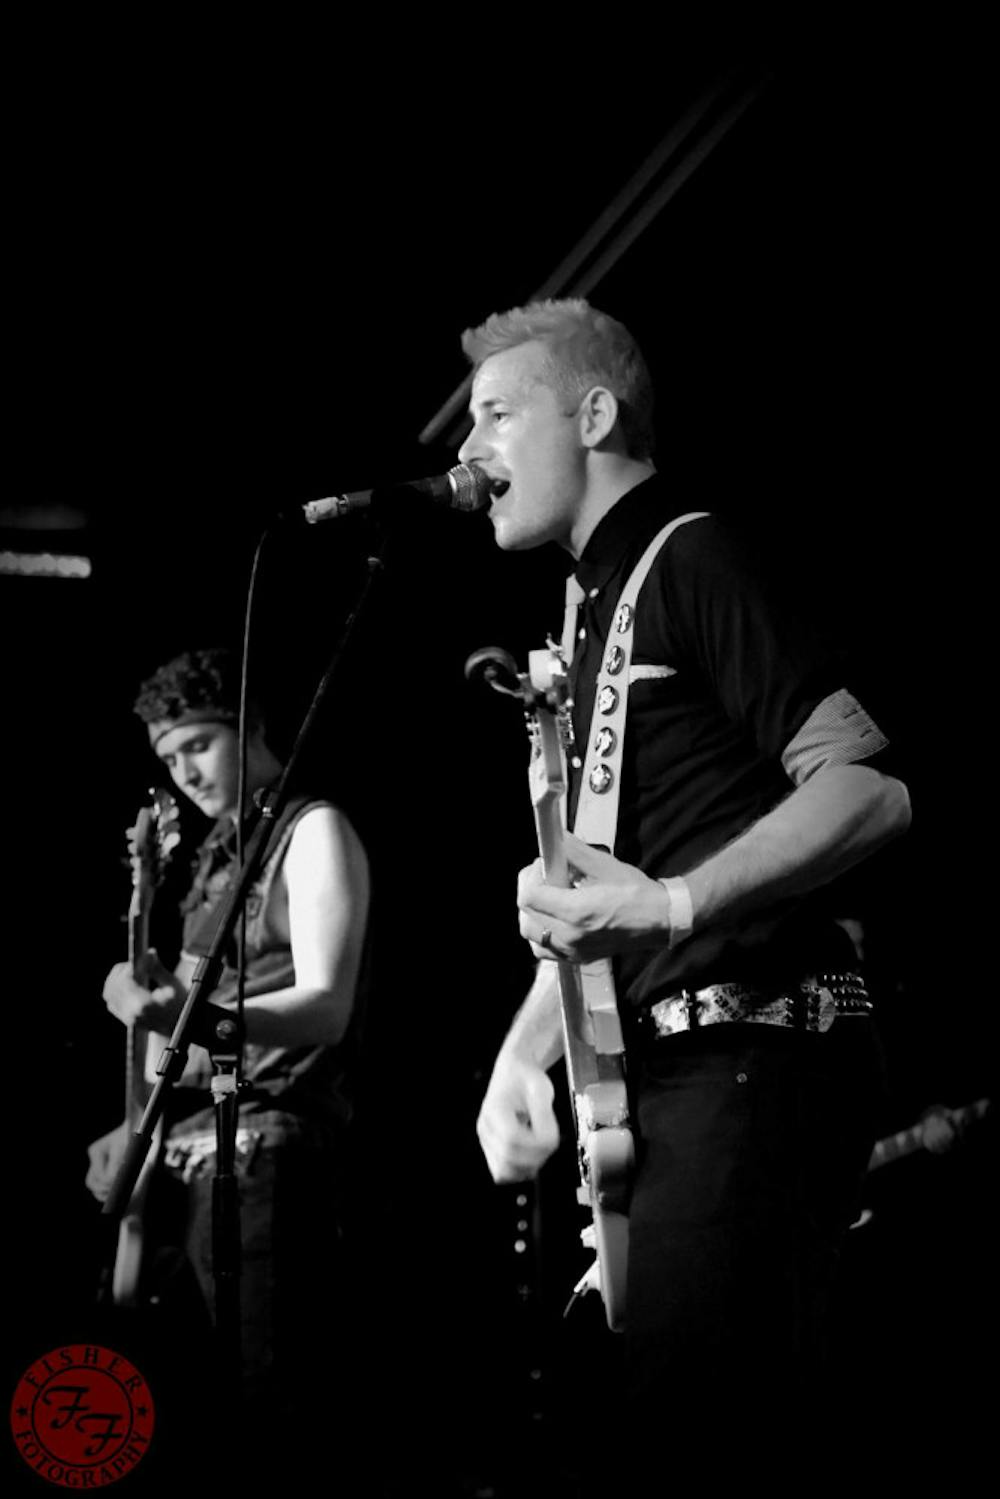 <p>Green Day tribute band American Idiots will perform at High Dive on Friday alongside Weezer tribute band Weeze. Doors open at 9 p.m. for the 10 p.m. show.</p>